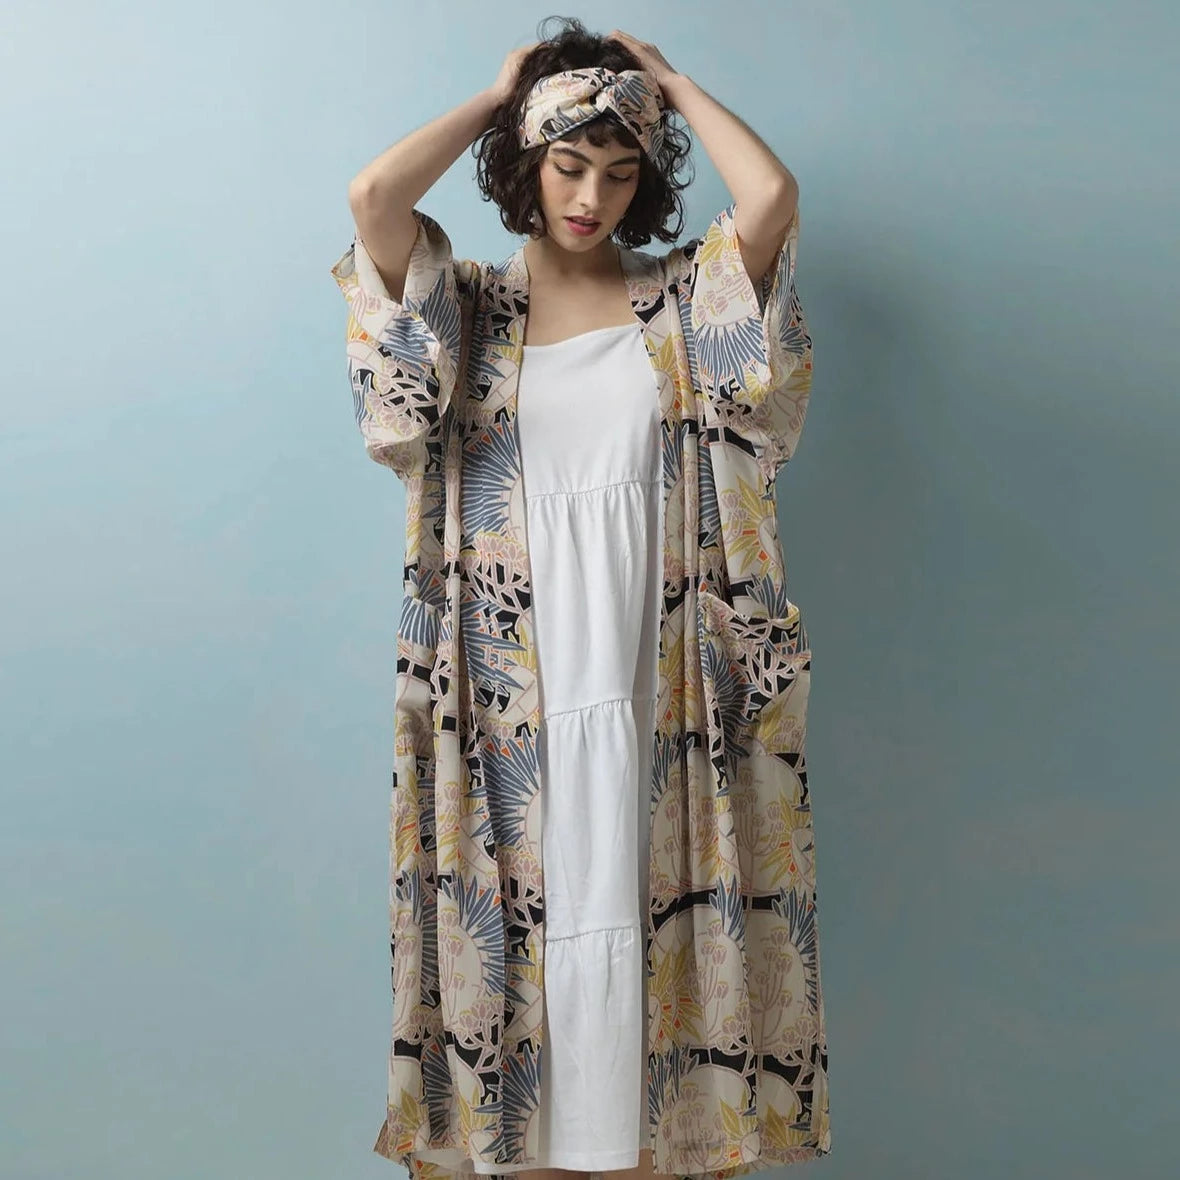 Deco Daisy Crepe Gown - The Nancy Smillie Shop - Art, Jewellery & Designer Gifts Glasgow